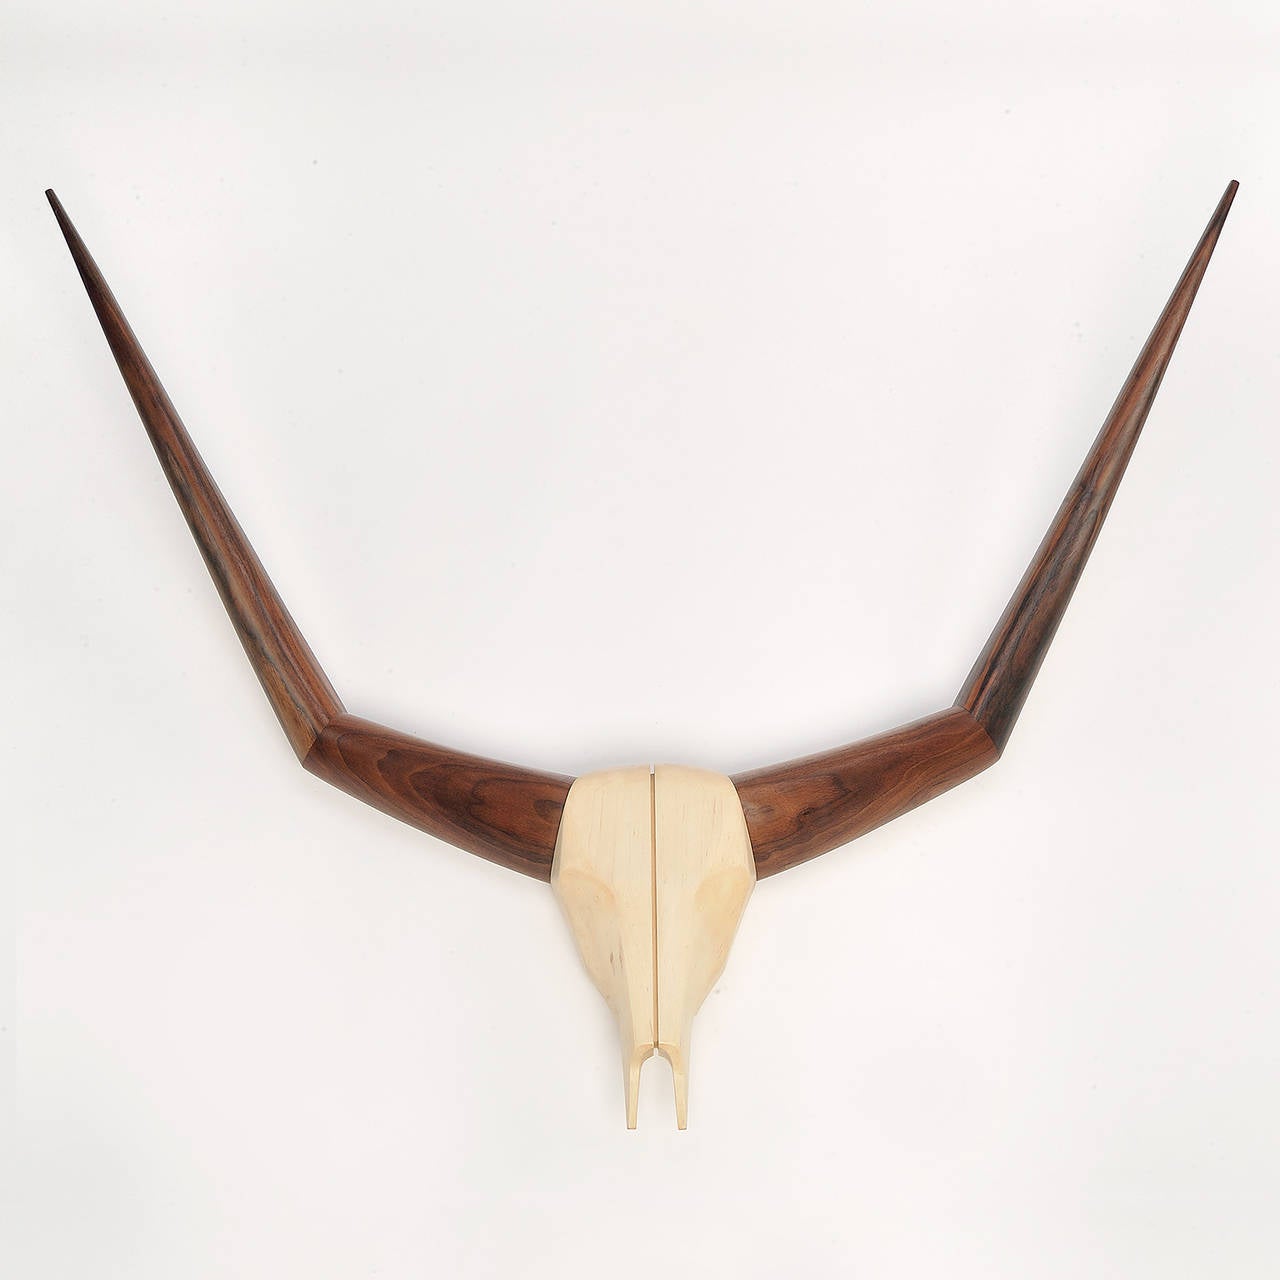 American deep walnut juxtaposes the beauty of blond sycamore to create a visually arresting likeness of cow horns.

We specialize in custom commissions.
Custom materials, finishes and dimensions available.